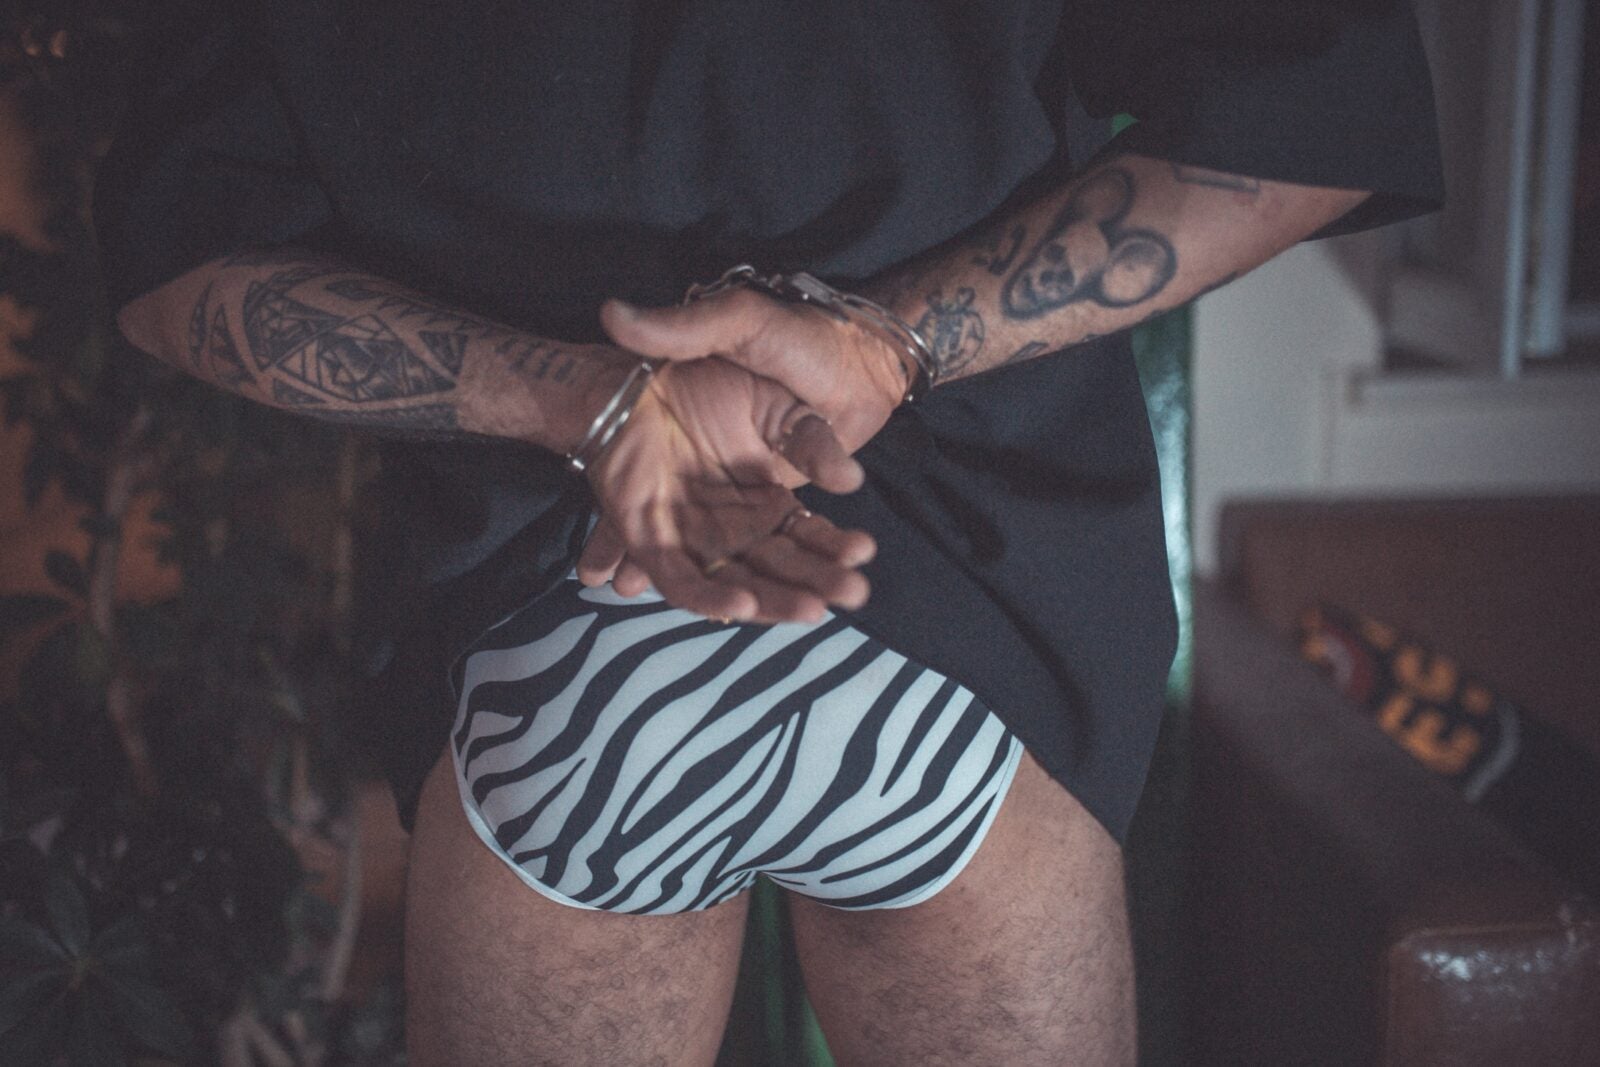 A Man Wearing Zebra Stripped Underwear With His Hands Handcuffed Behind Him.